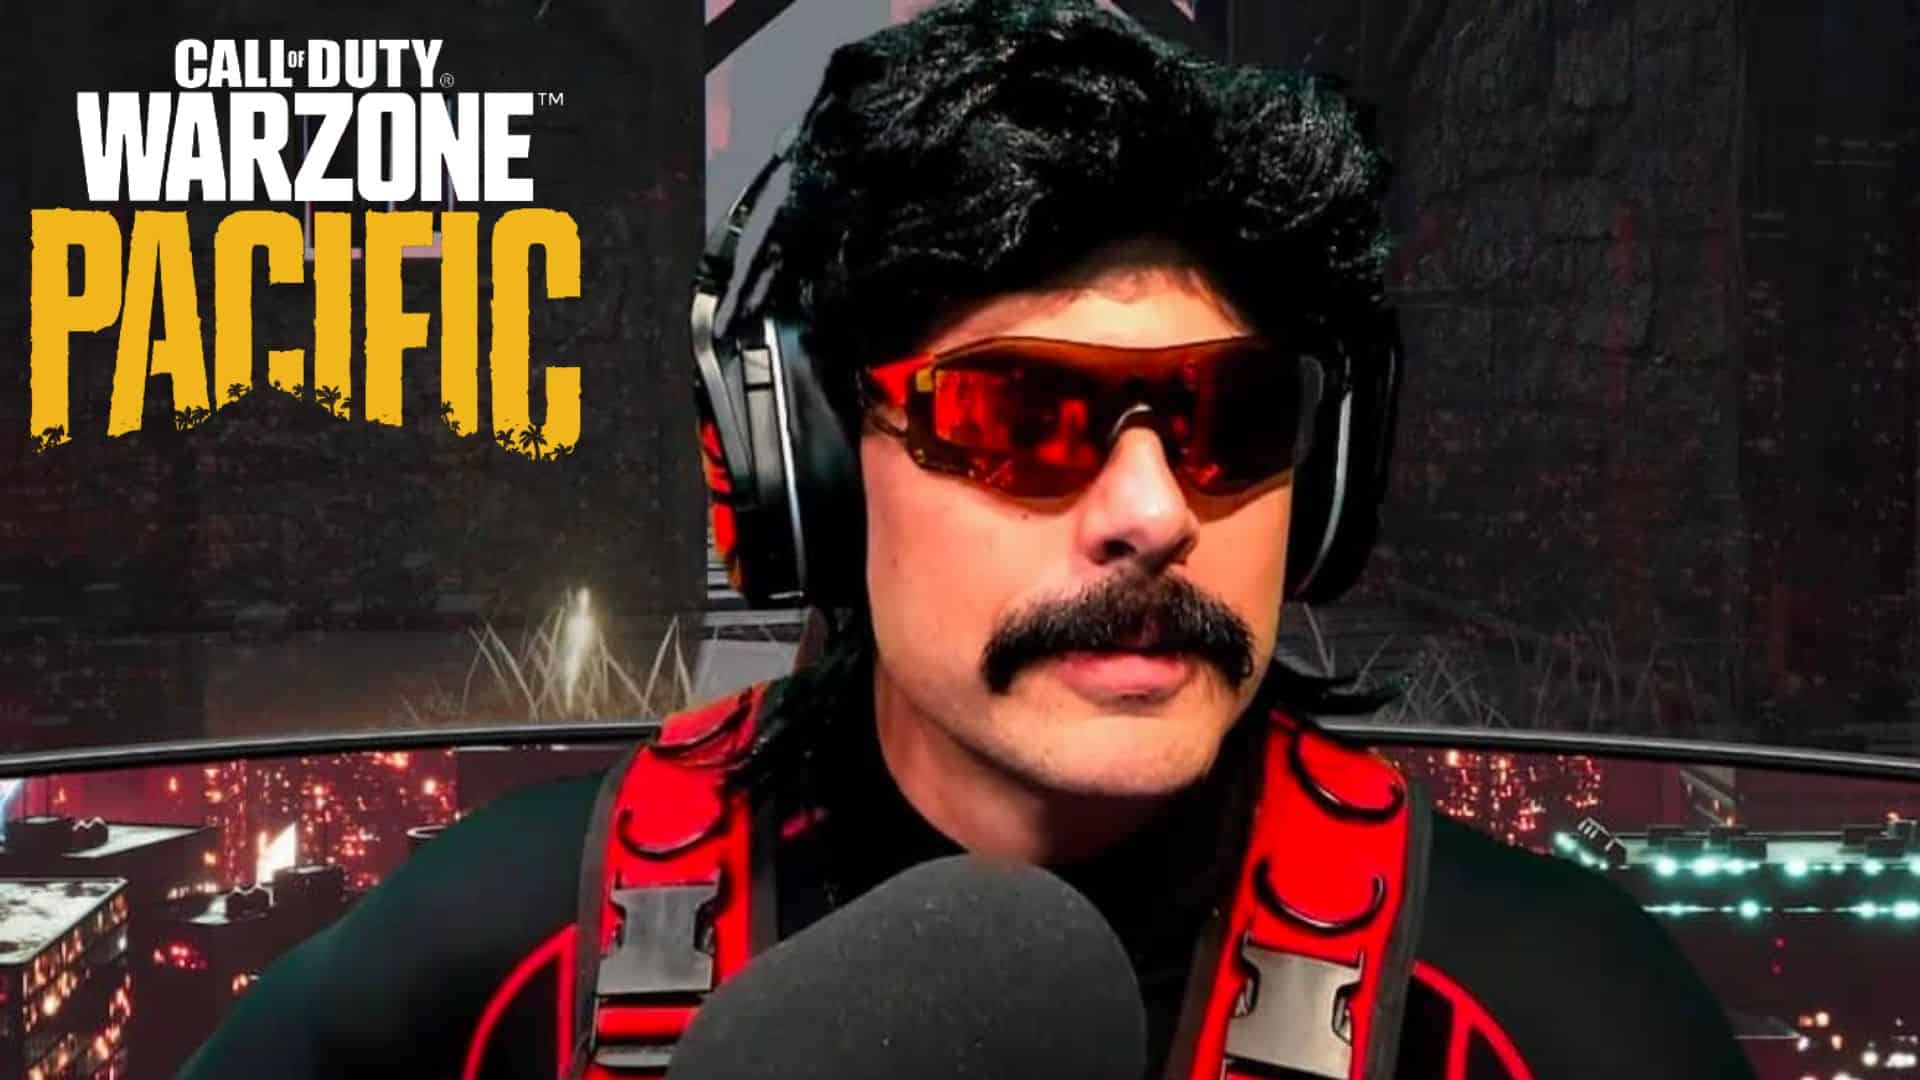 Dr Disrespect looking annoyed next to Warzone logo